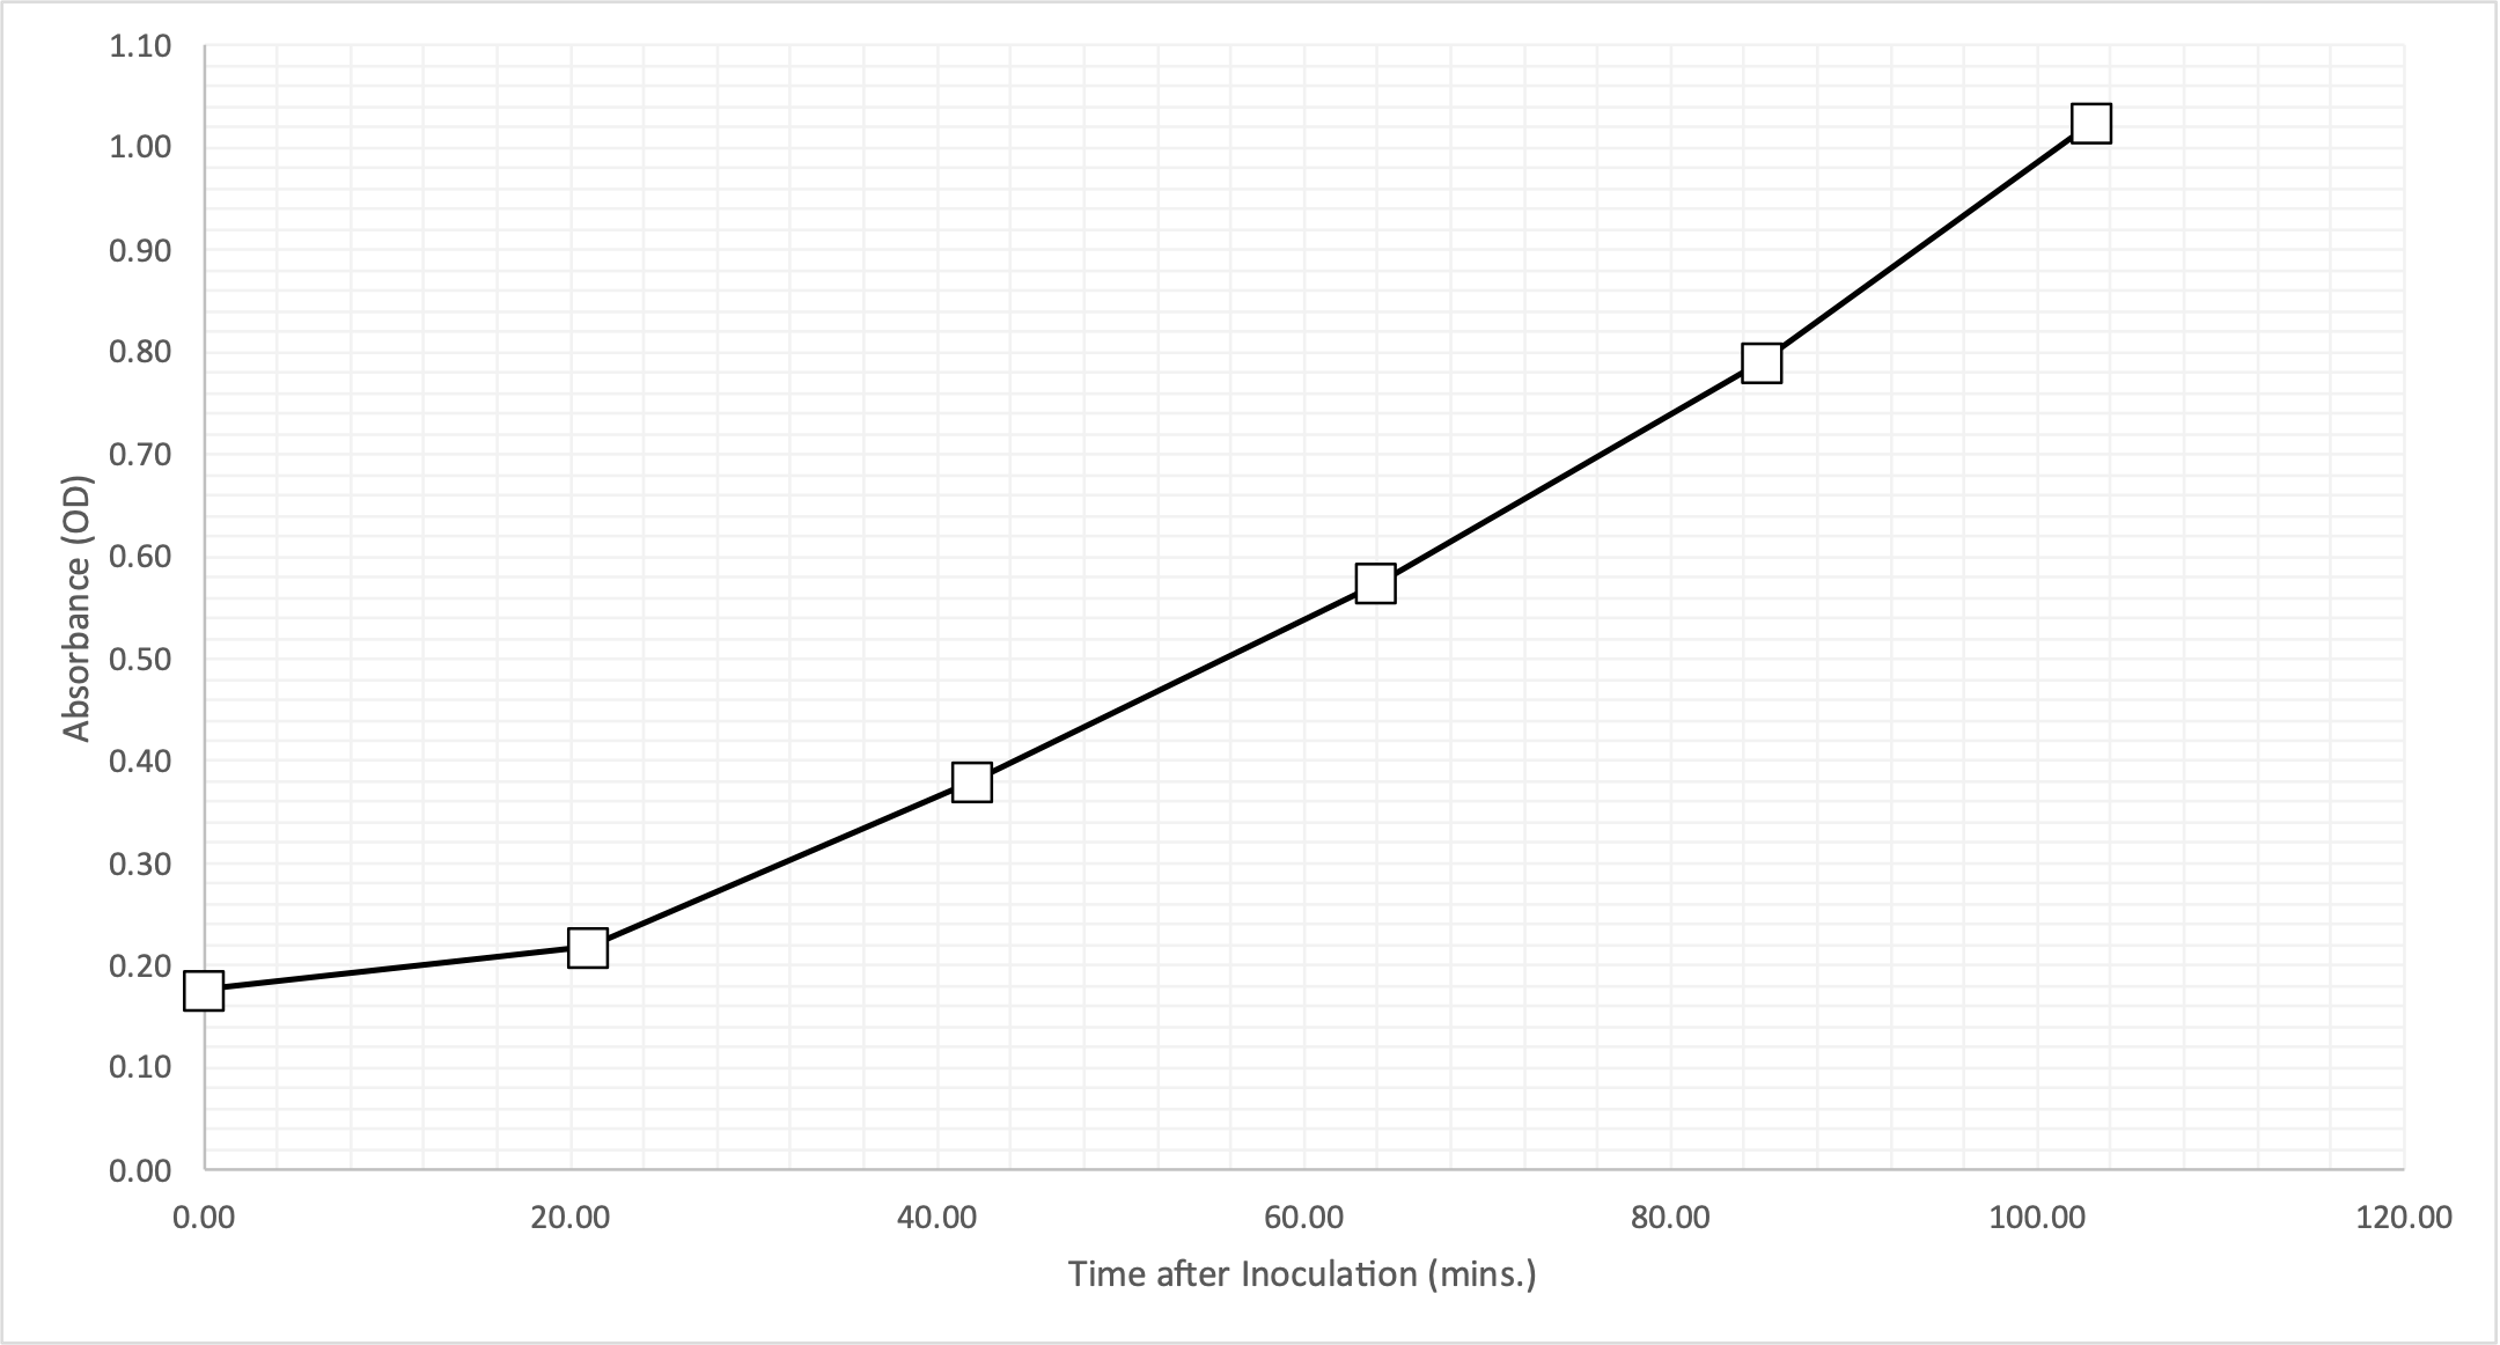 Dependence of absorbance on time elapsed since the beginning of inoculation